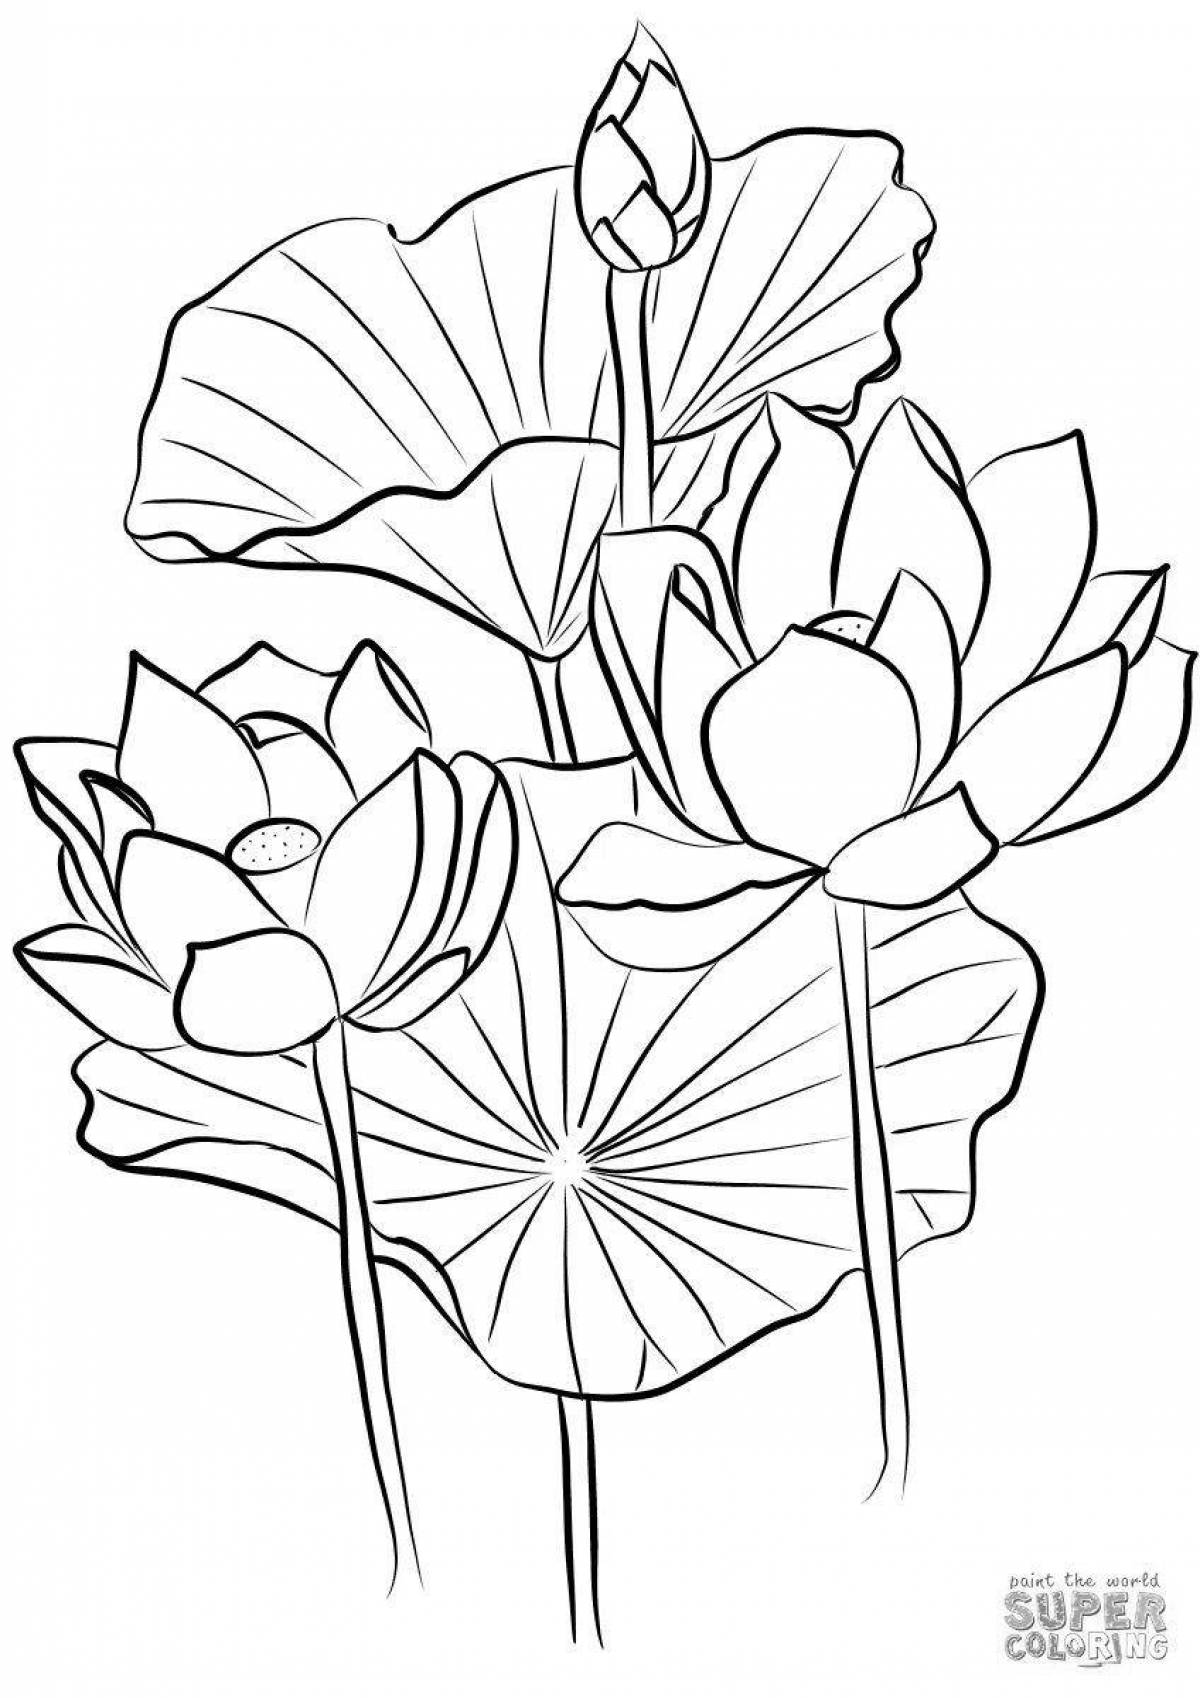 Adorable lotus coloring page for kids